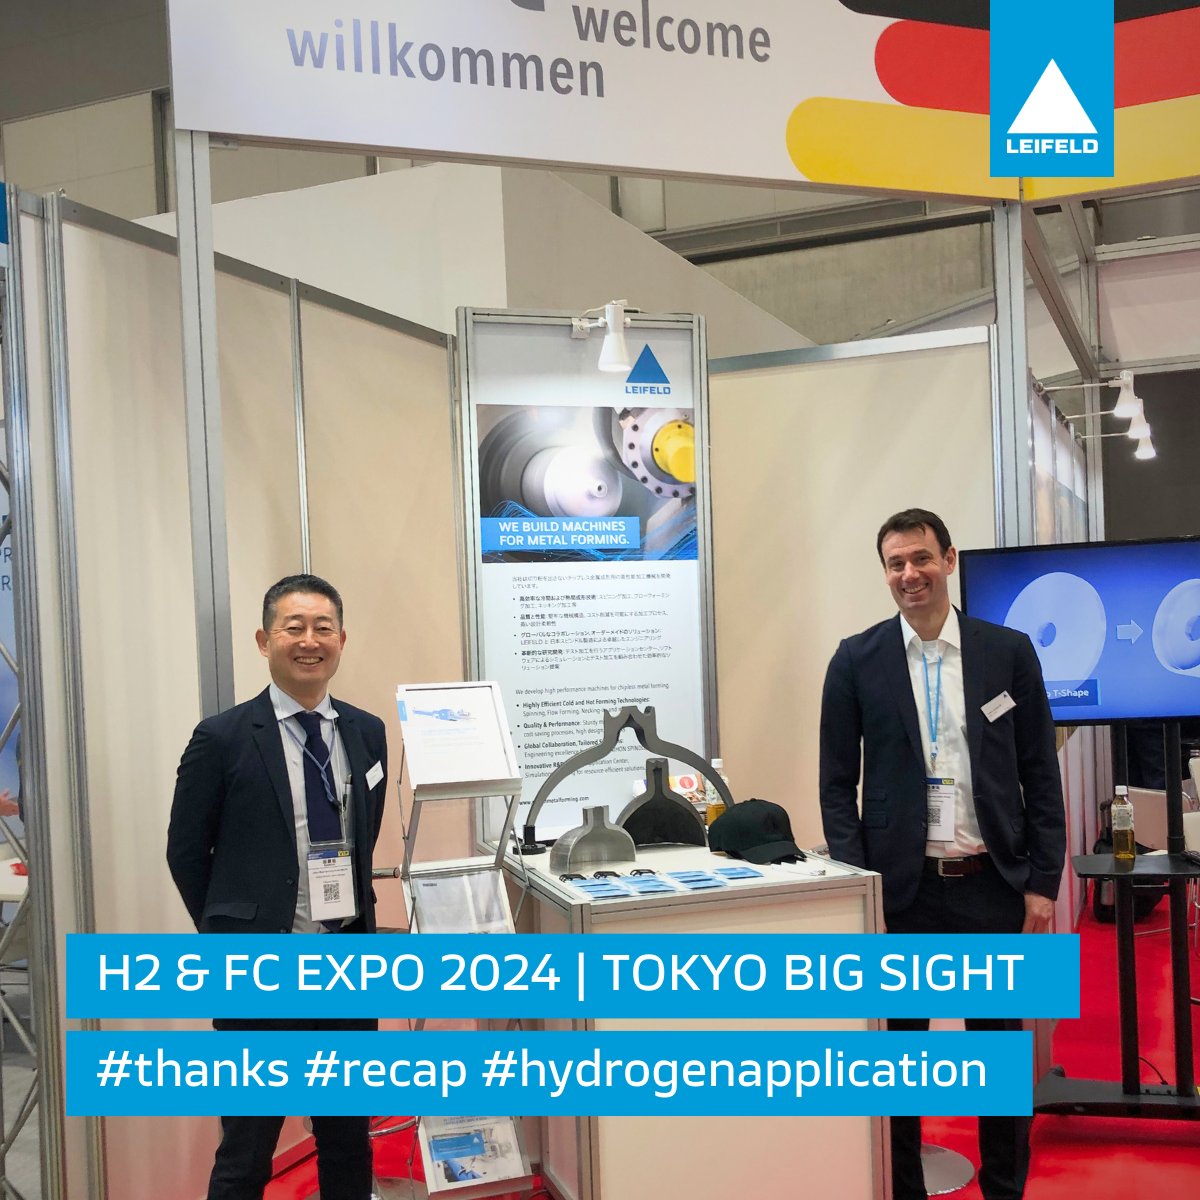 What an incredible time it's been at the H2 & FC Expo, where we presented our innovative LEIFELD Aluminum Forming Center for the production of hydrogen cylinders. Missed out to visit the expo? Don't worry! Reach out to us to learn more: leifeldms.com/en/contact.html #FutureForward